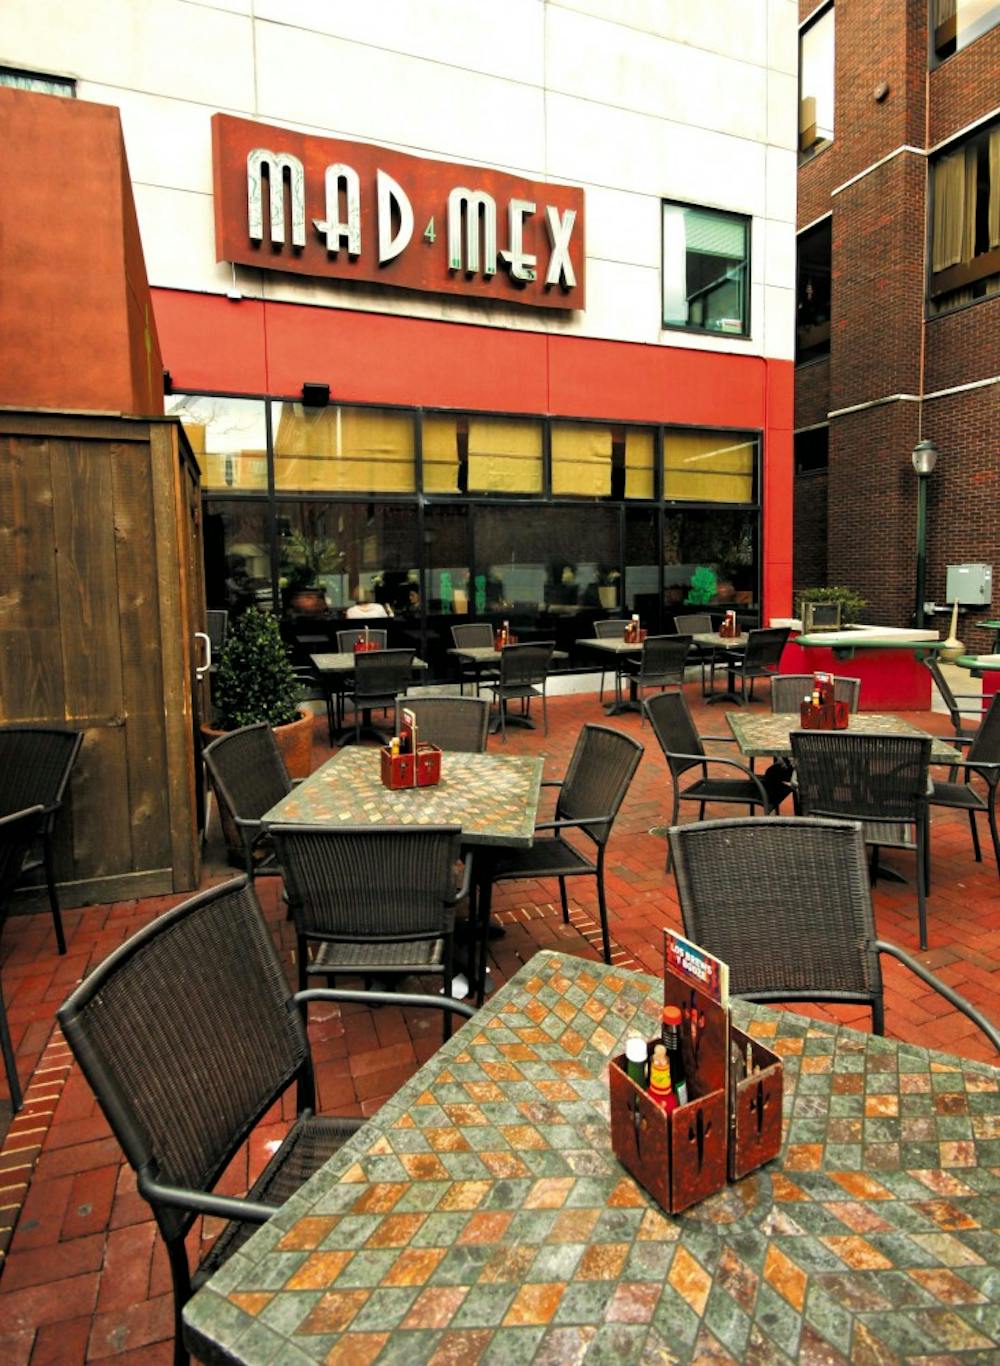 	Best on-campus happy hour deal: Mad 4 Mex

	34th and Sansom streets, behind CVS


At 4:30 p.m., Mad 4 Mex cuts loose. For the next two hours, eaters and drinkers alike at the updated Mexican restaurant can treat themselves to half-price wings and draft beers, and a special margarita menu that includes “Big Azz” 22-ounce house margaritas for only $7. Not to mention that every night from 11:00 p.m. and 1:00 a.m. visitors with valid student IDs can get half off most menu items.